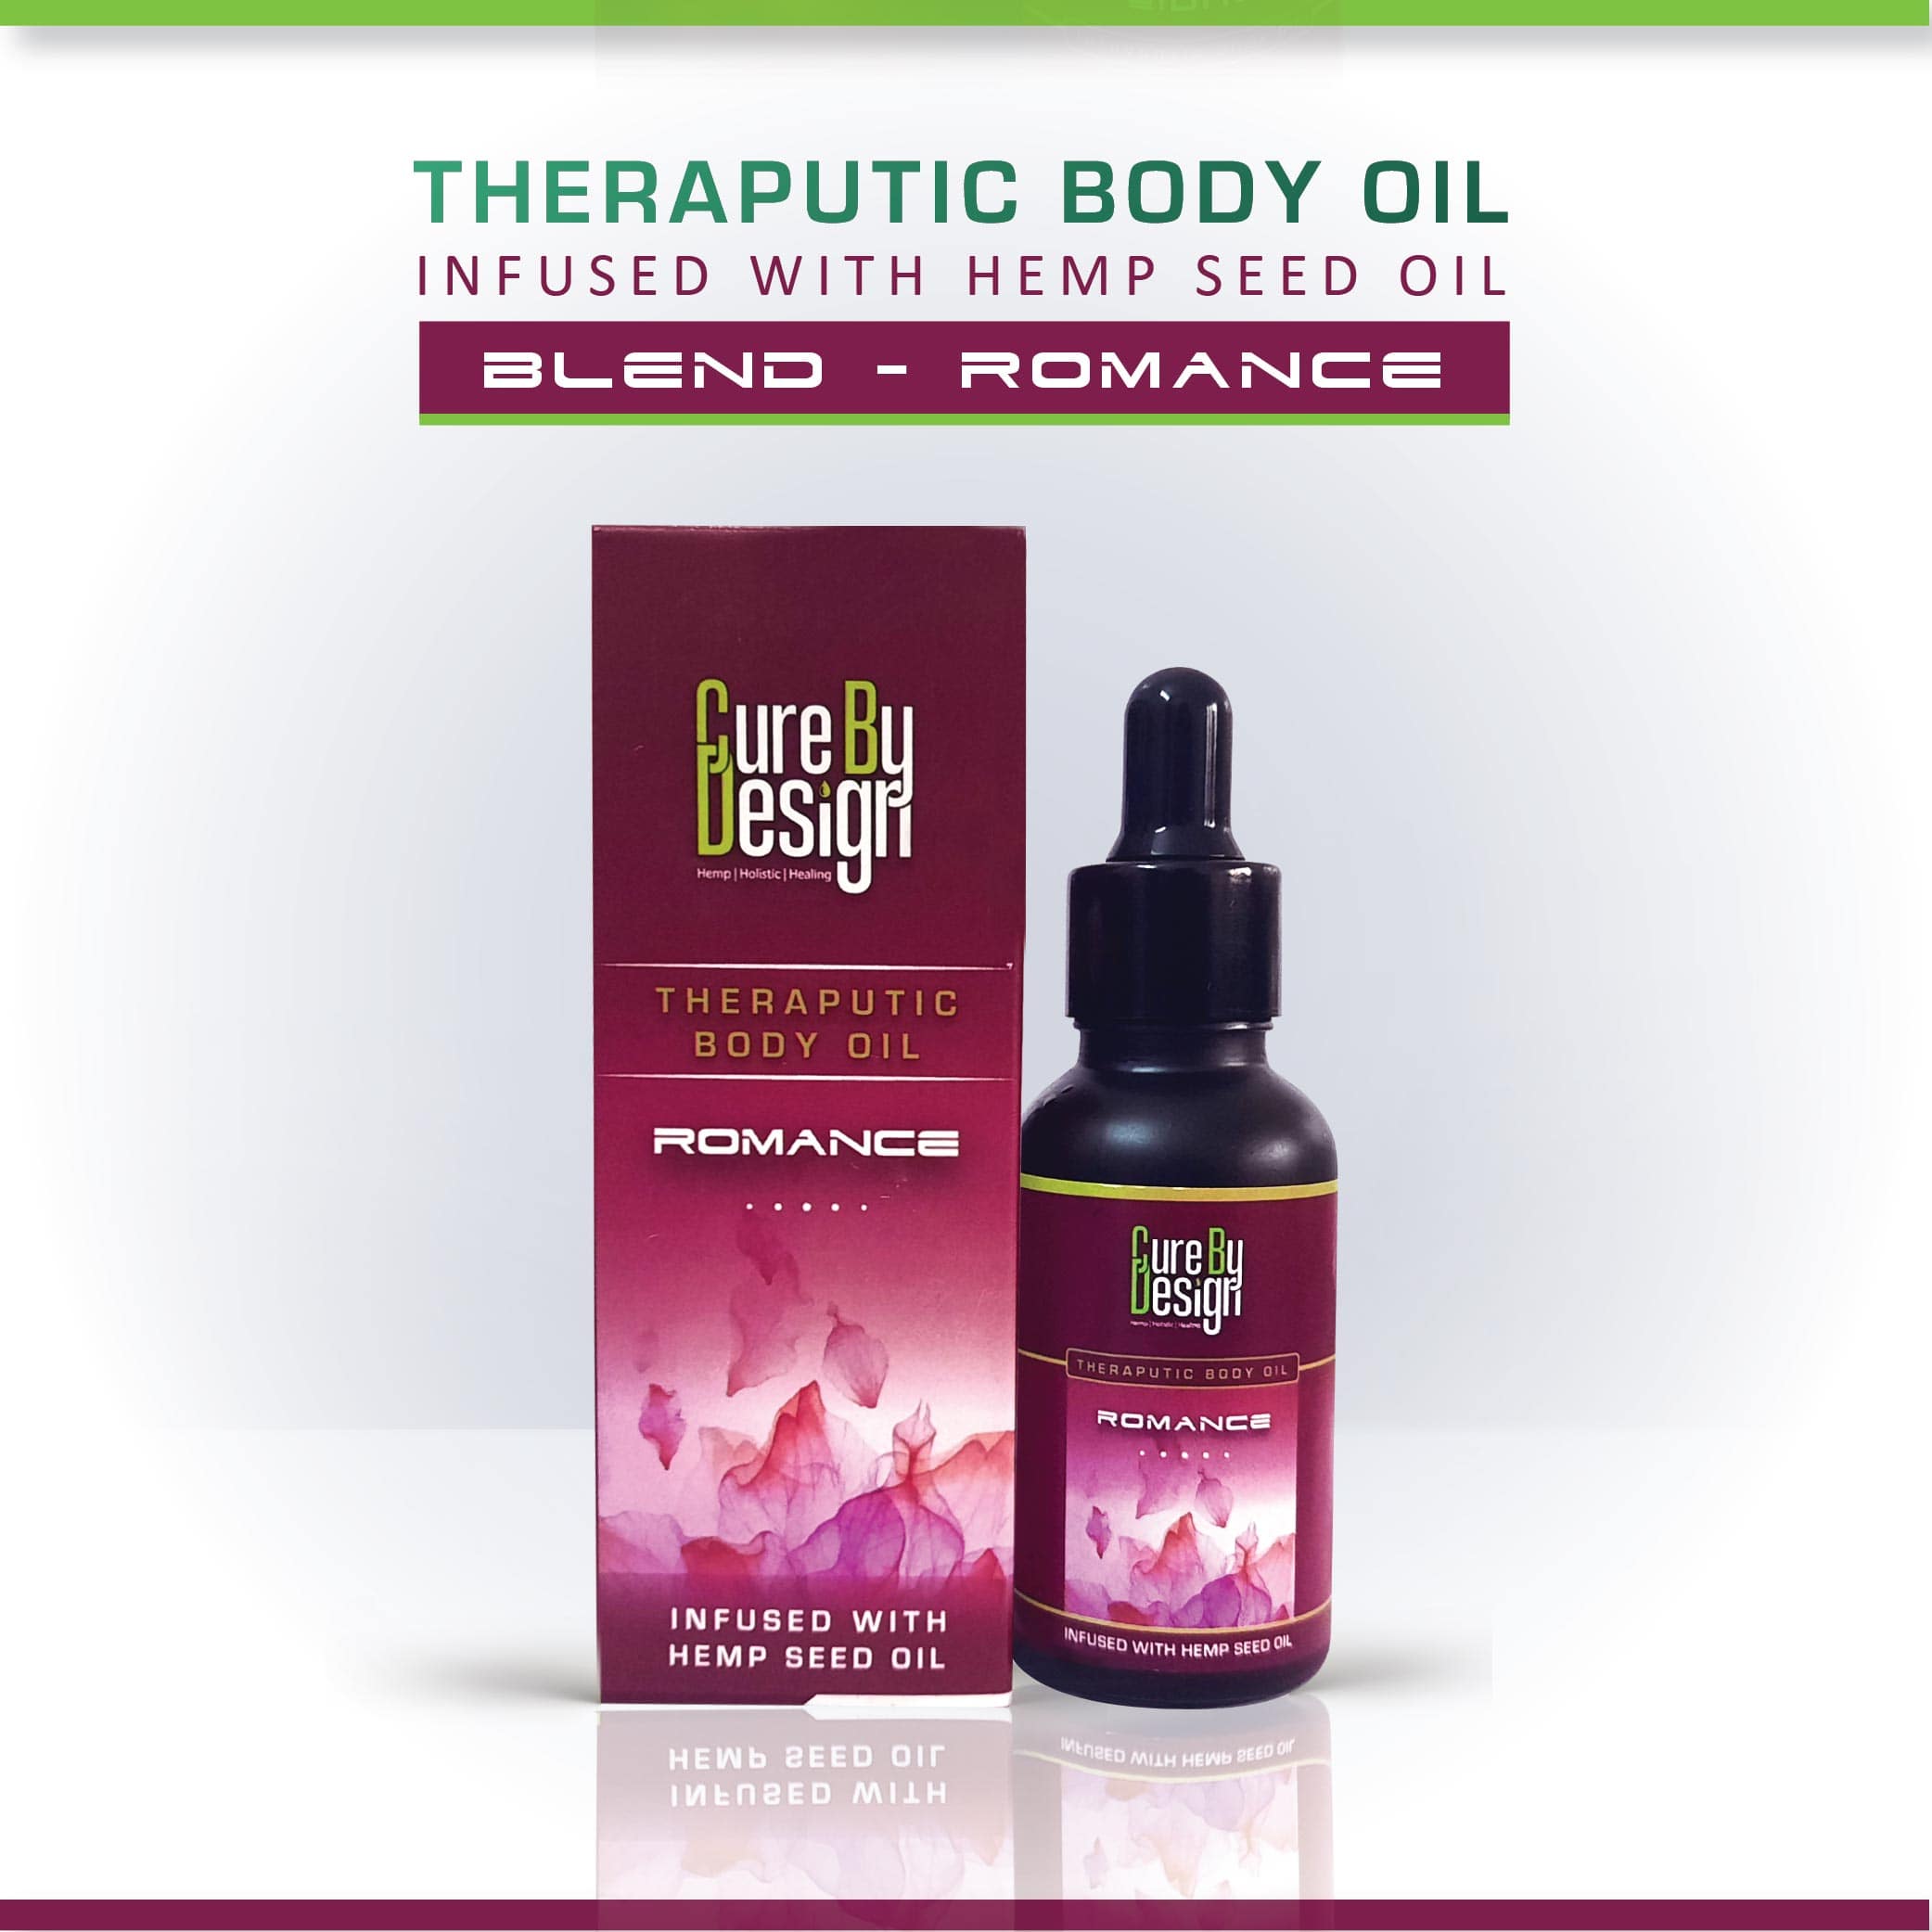 Cure By Design Theraputic Body Oil Infused with Hemp Seed Oil for Romance